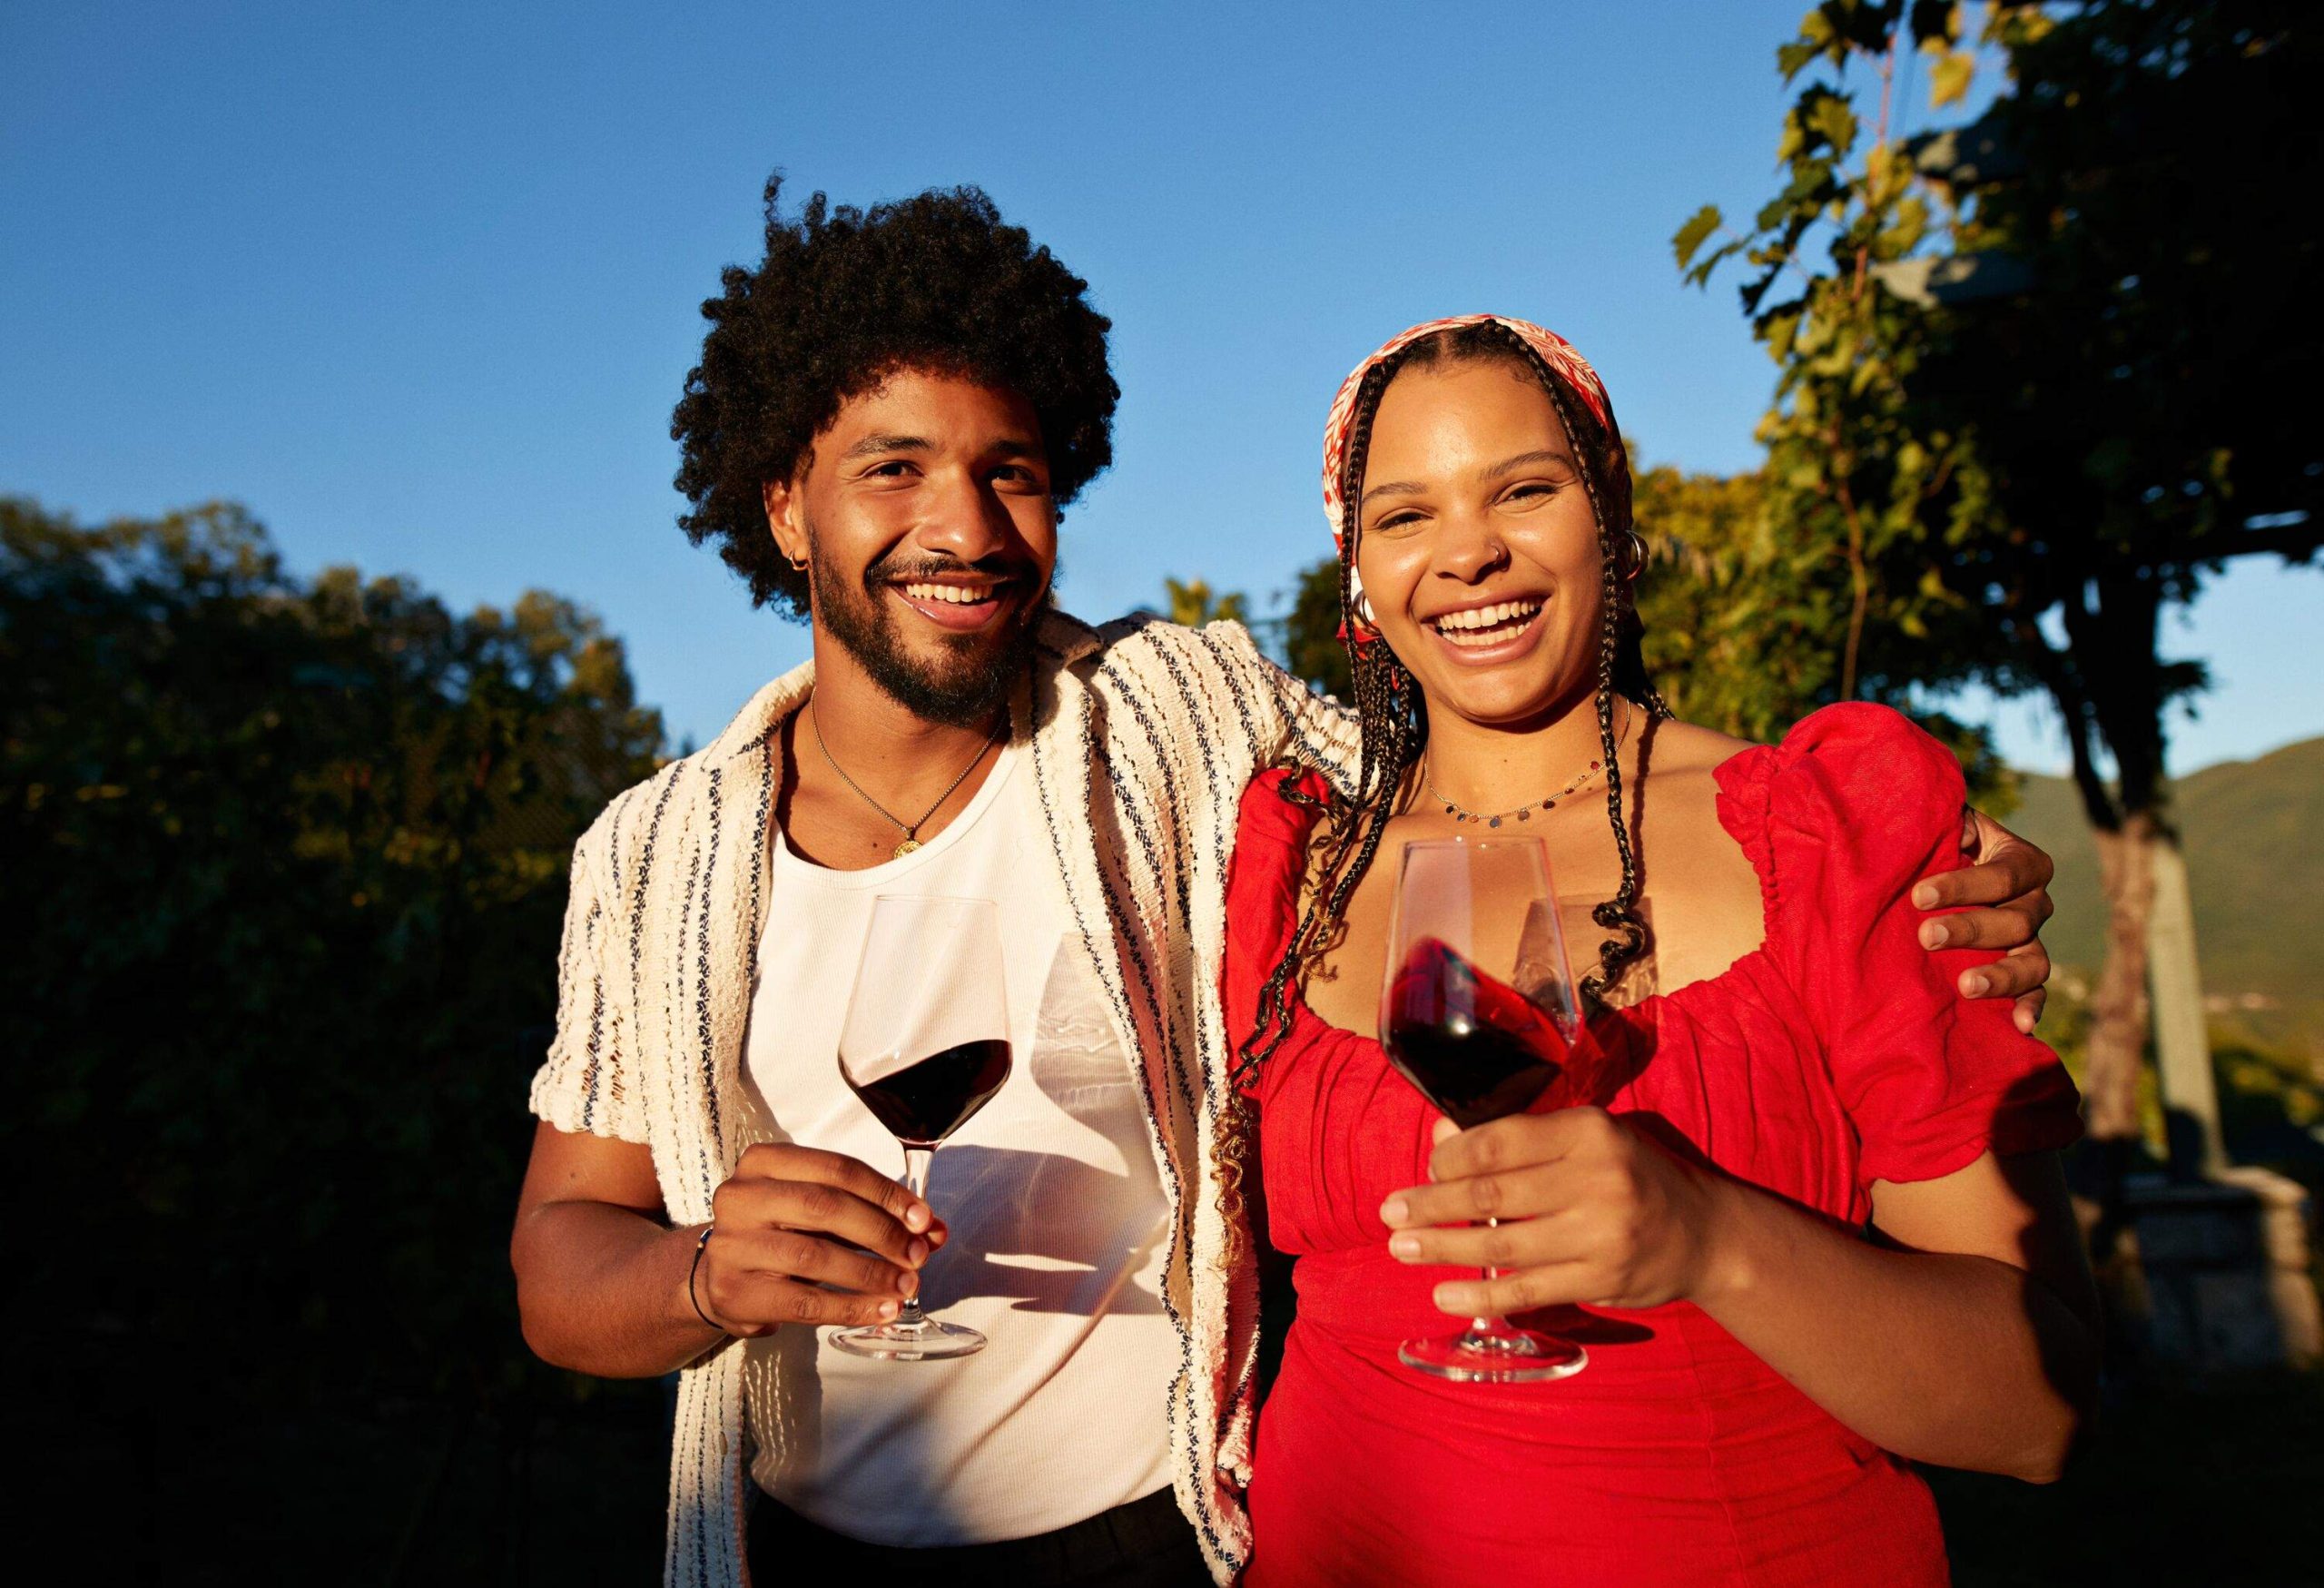 Portrait of happy couple holding wineglasses standing with arm around each other in vineyard during sunset